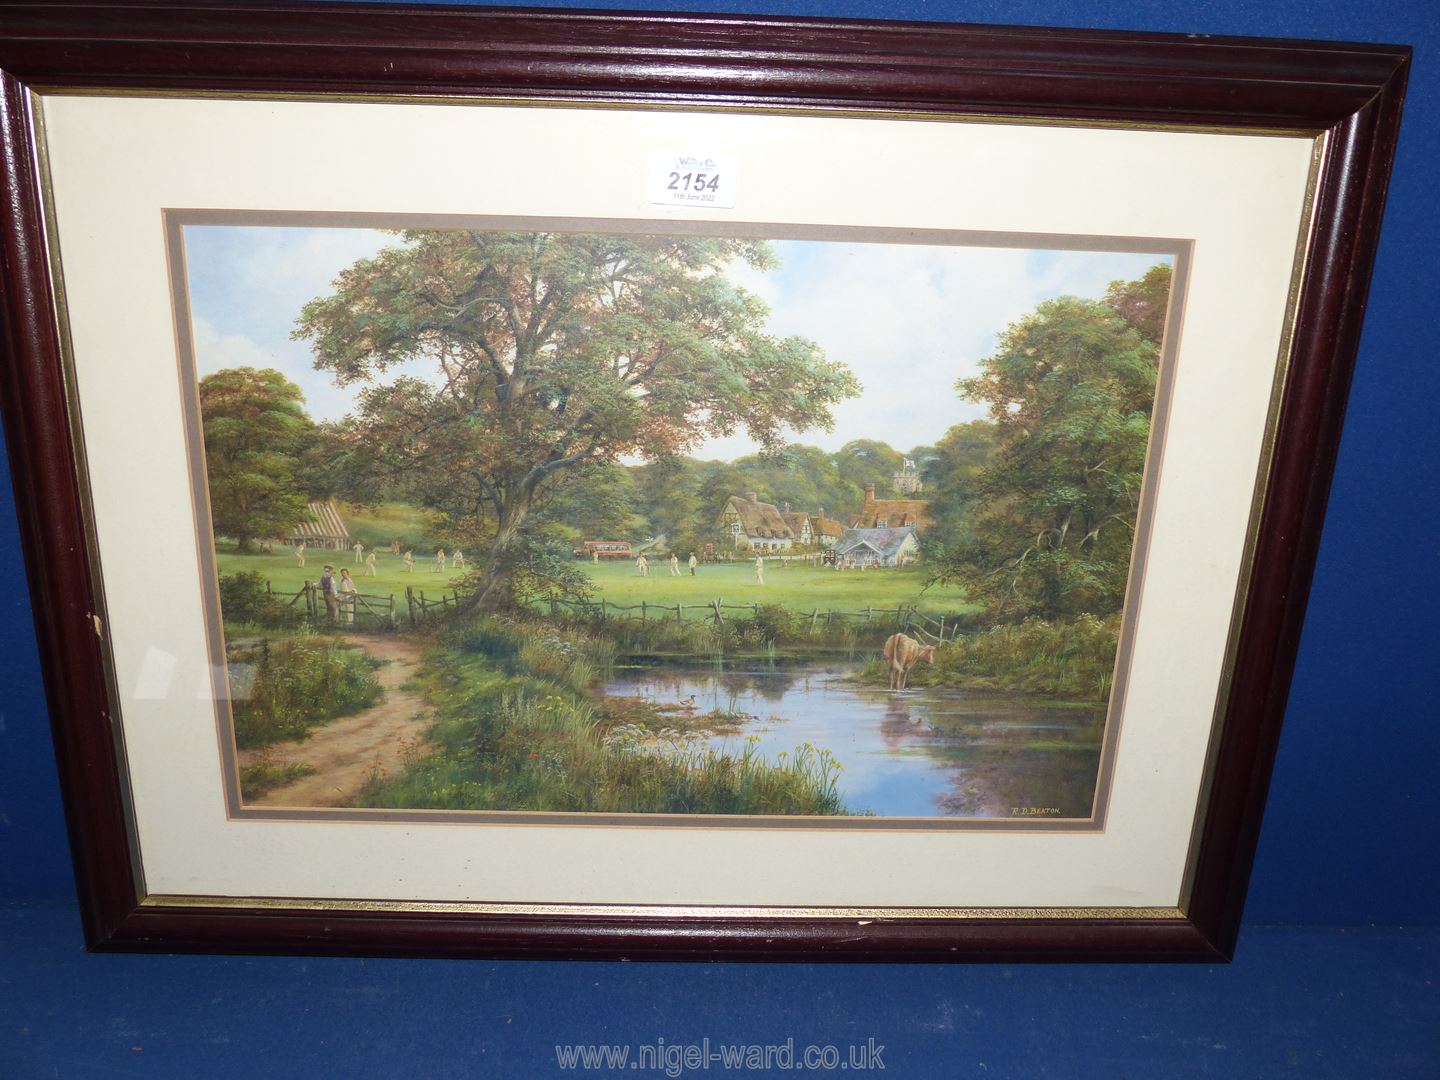 A framed and mounted Ron Beaton Print titled 'Willow and Thatch' 24 3/4" x 18 1/2". - Image 2 of 2